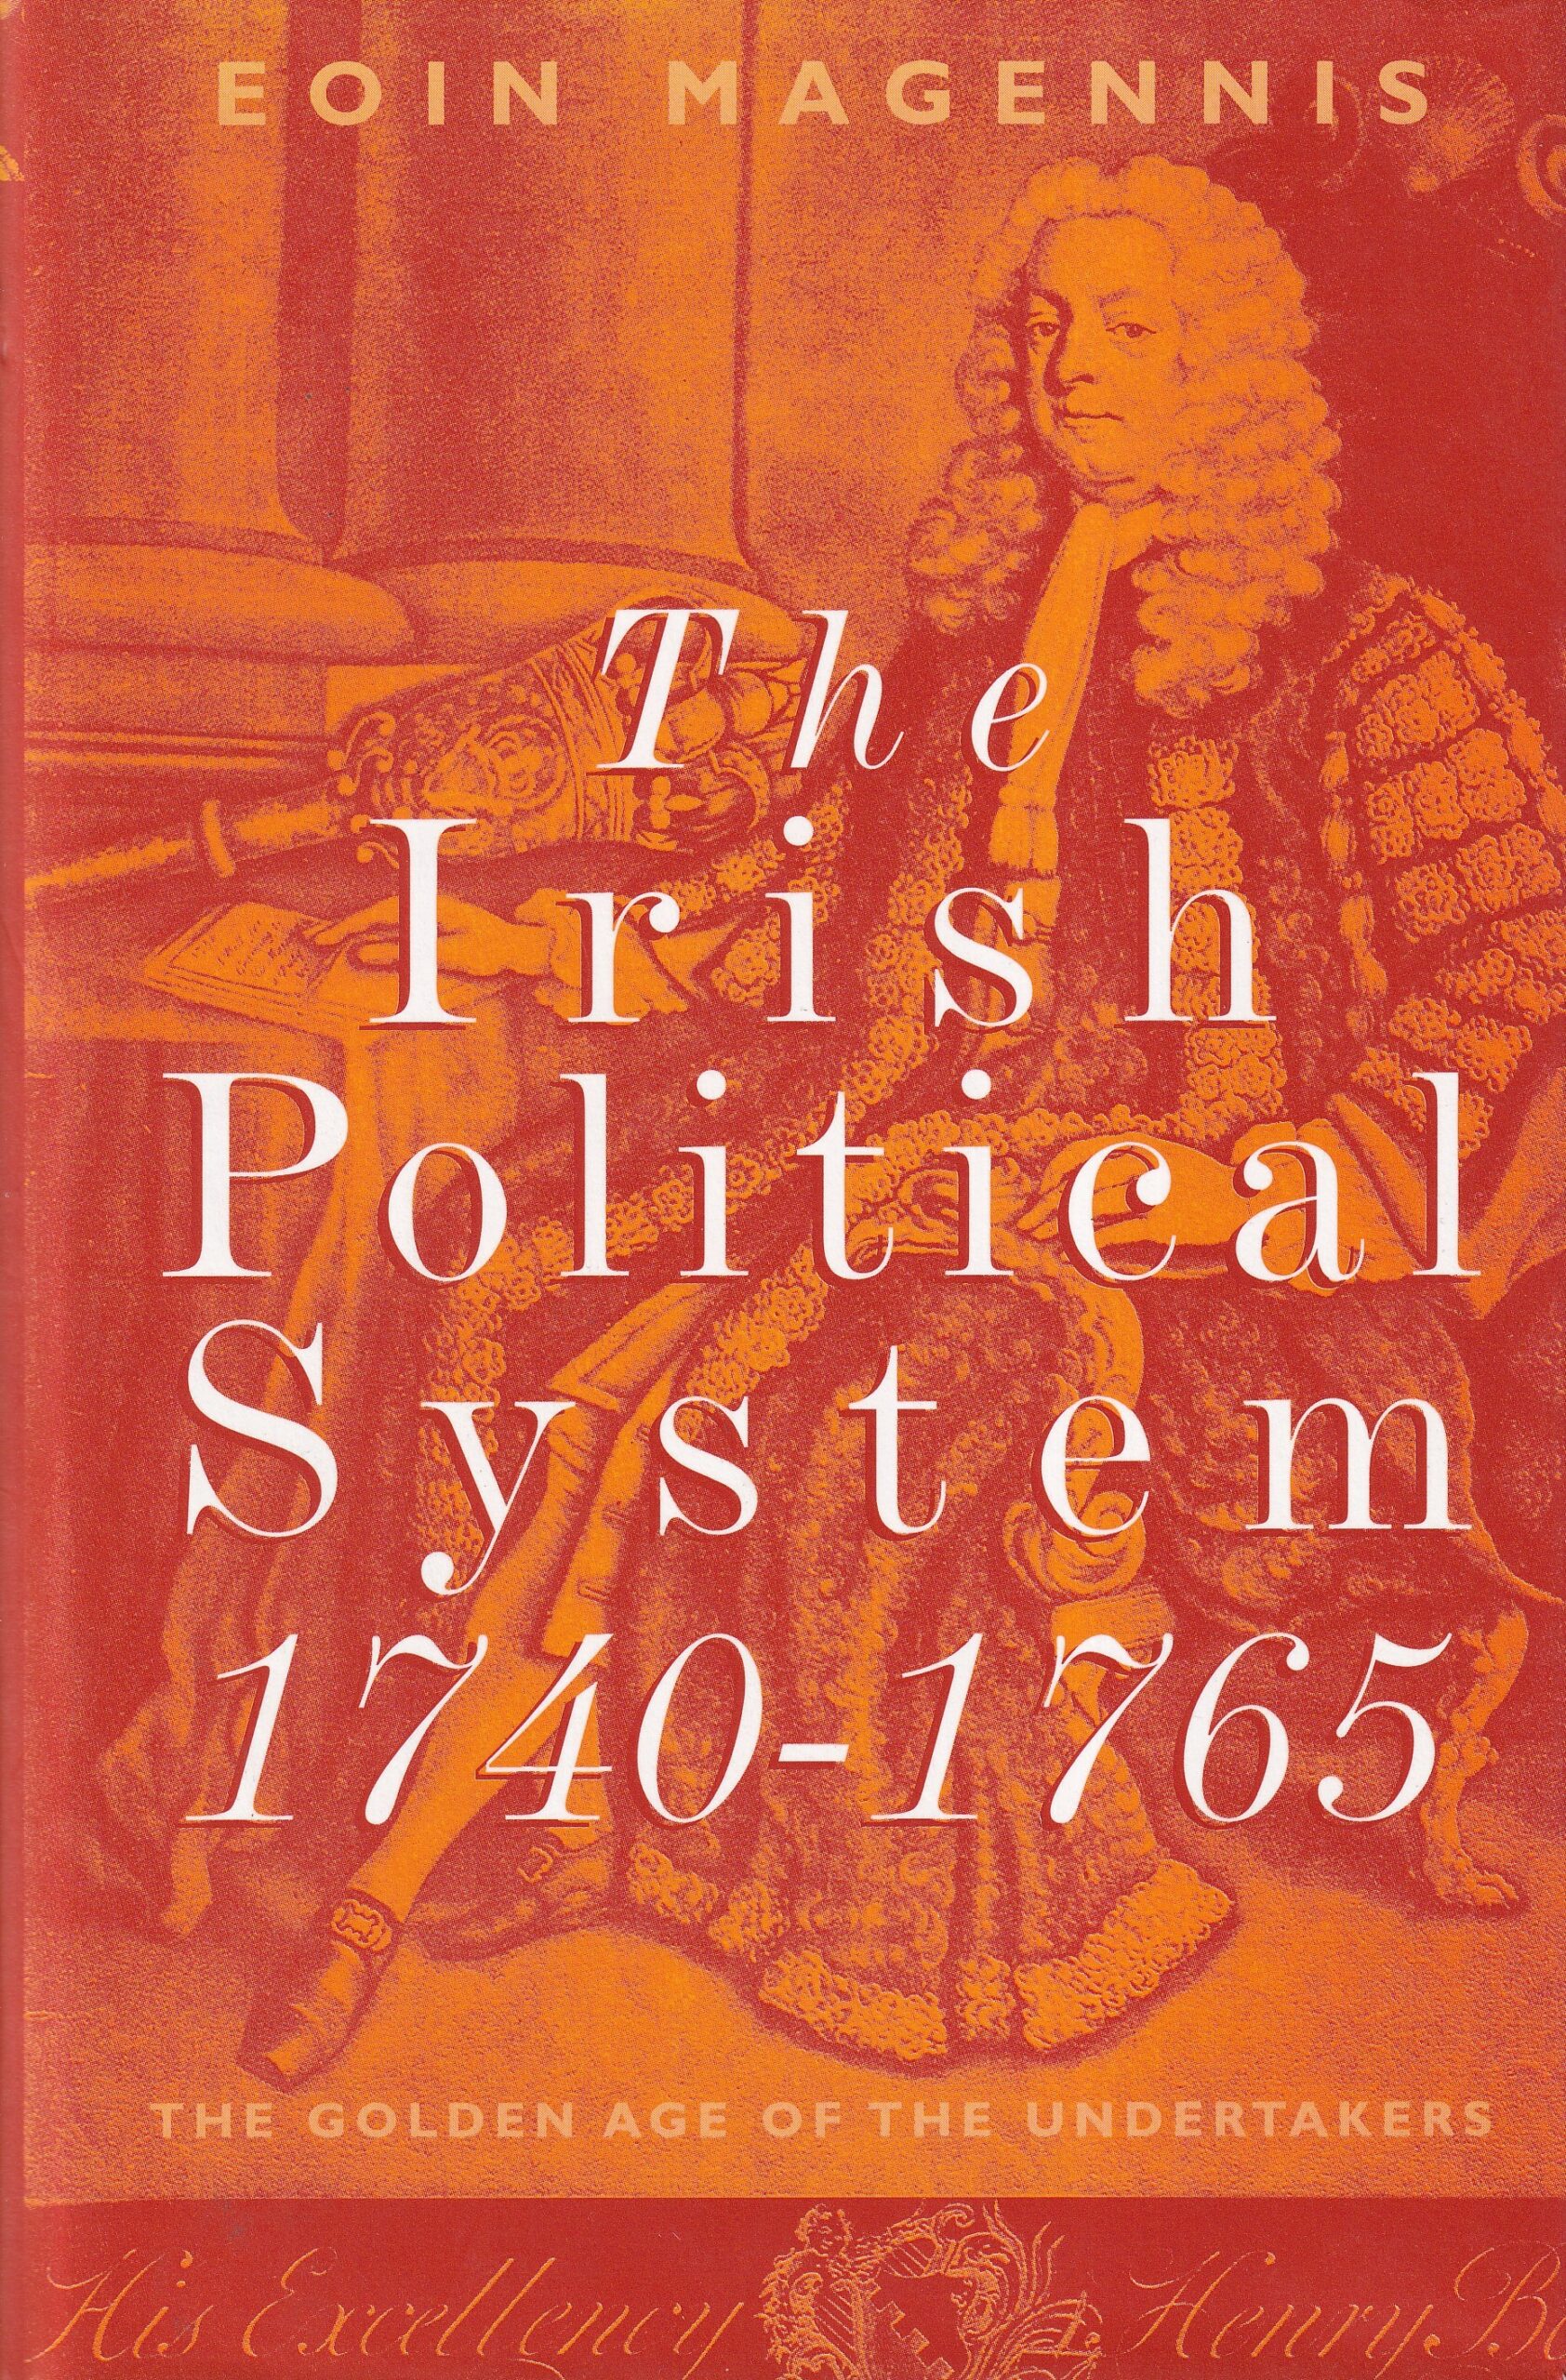 The Irish Political System, 1740-1765: The Golden Age of the Undertakers | Eoin Magennis | Charlie Byrne's